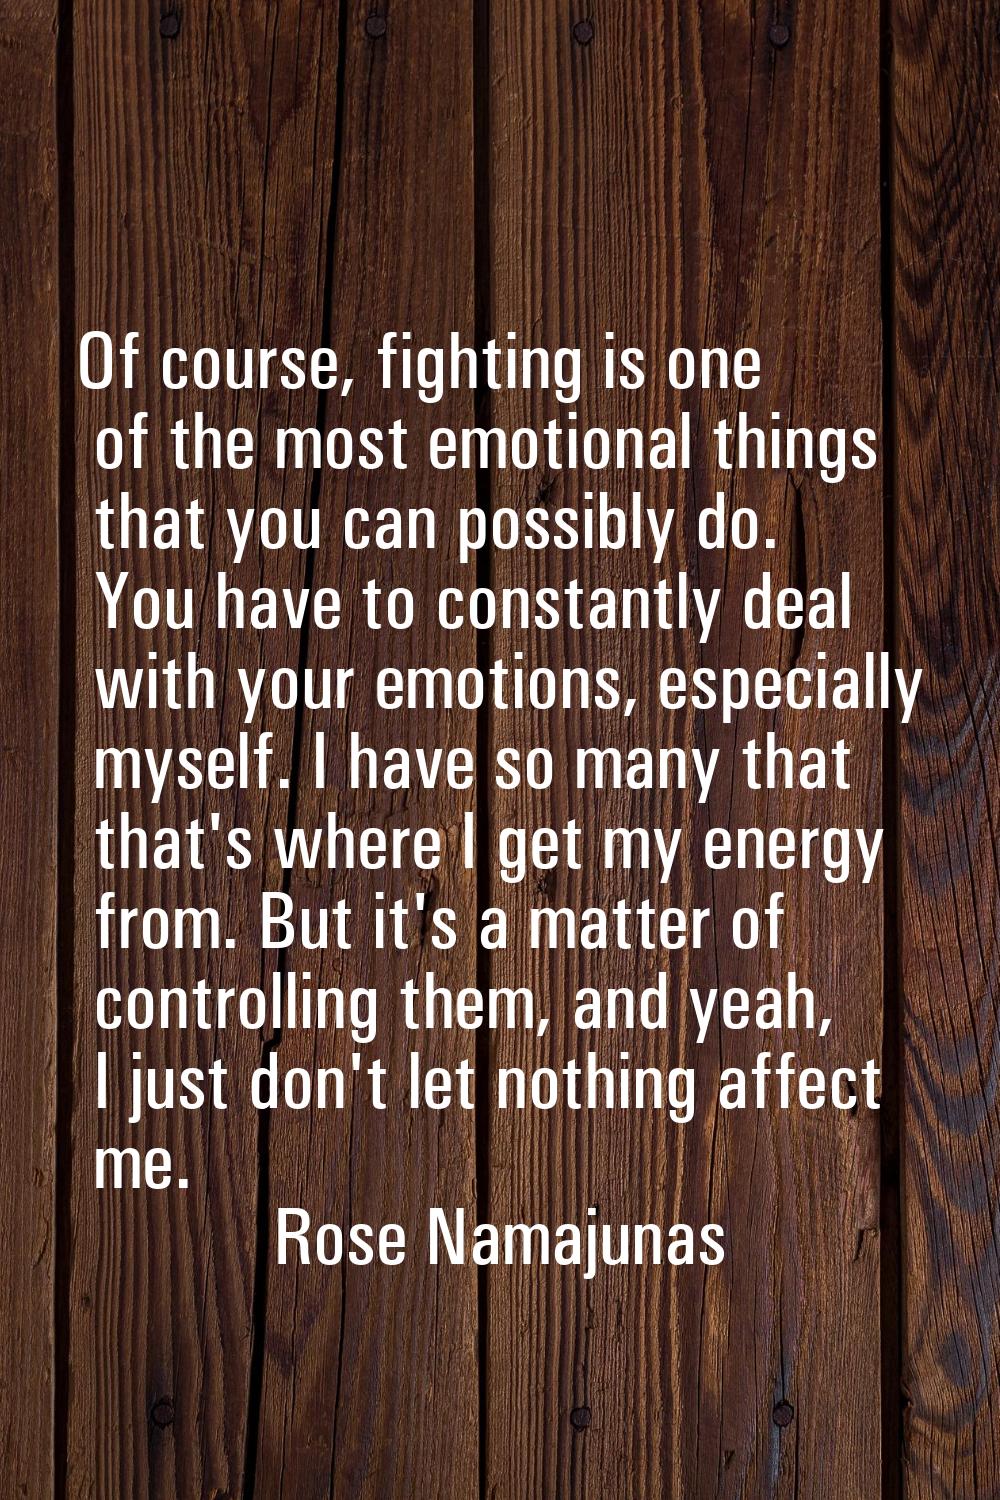 Of course, fighting is one of the most emotional things that you can possibly do. You have to const